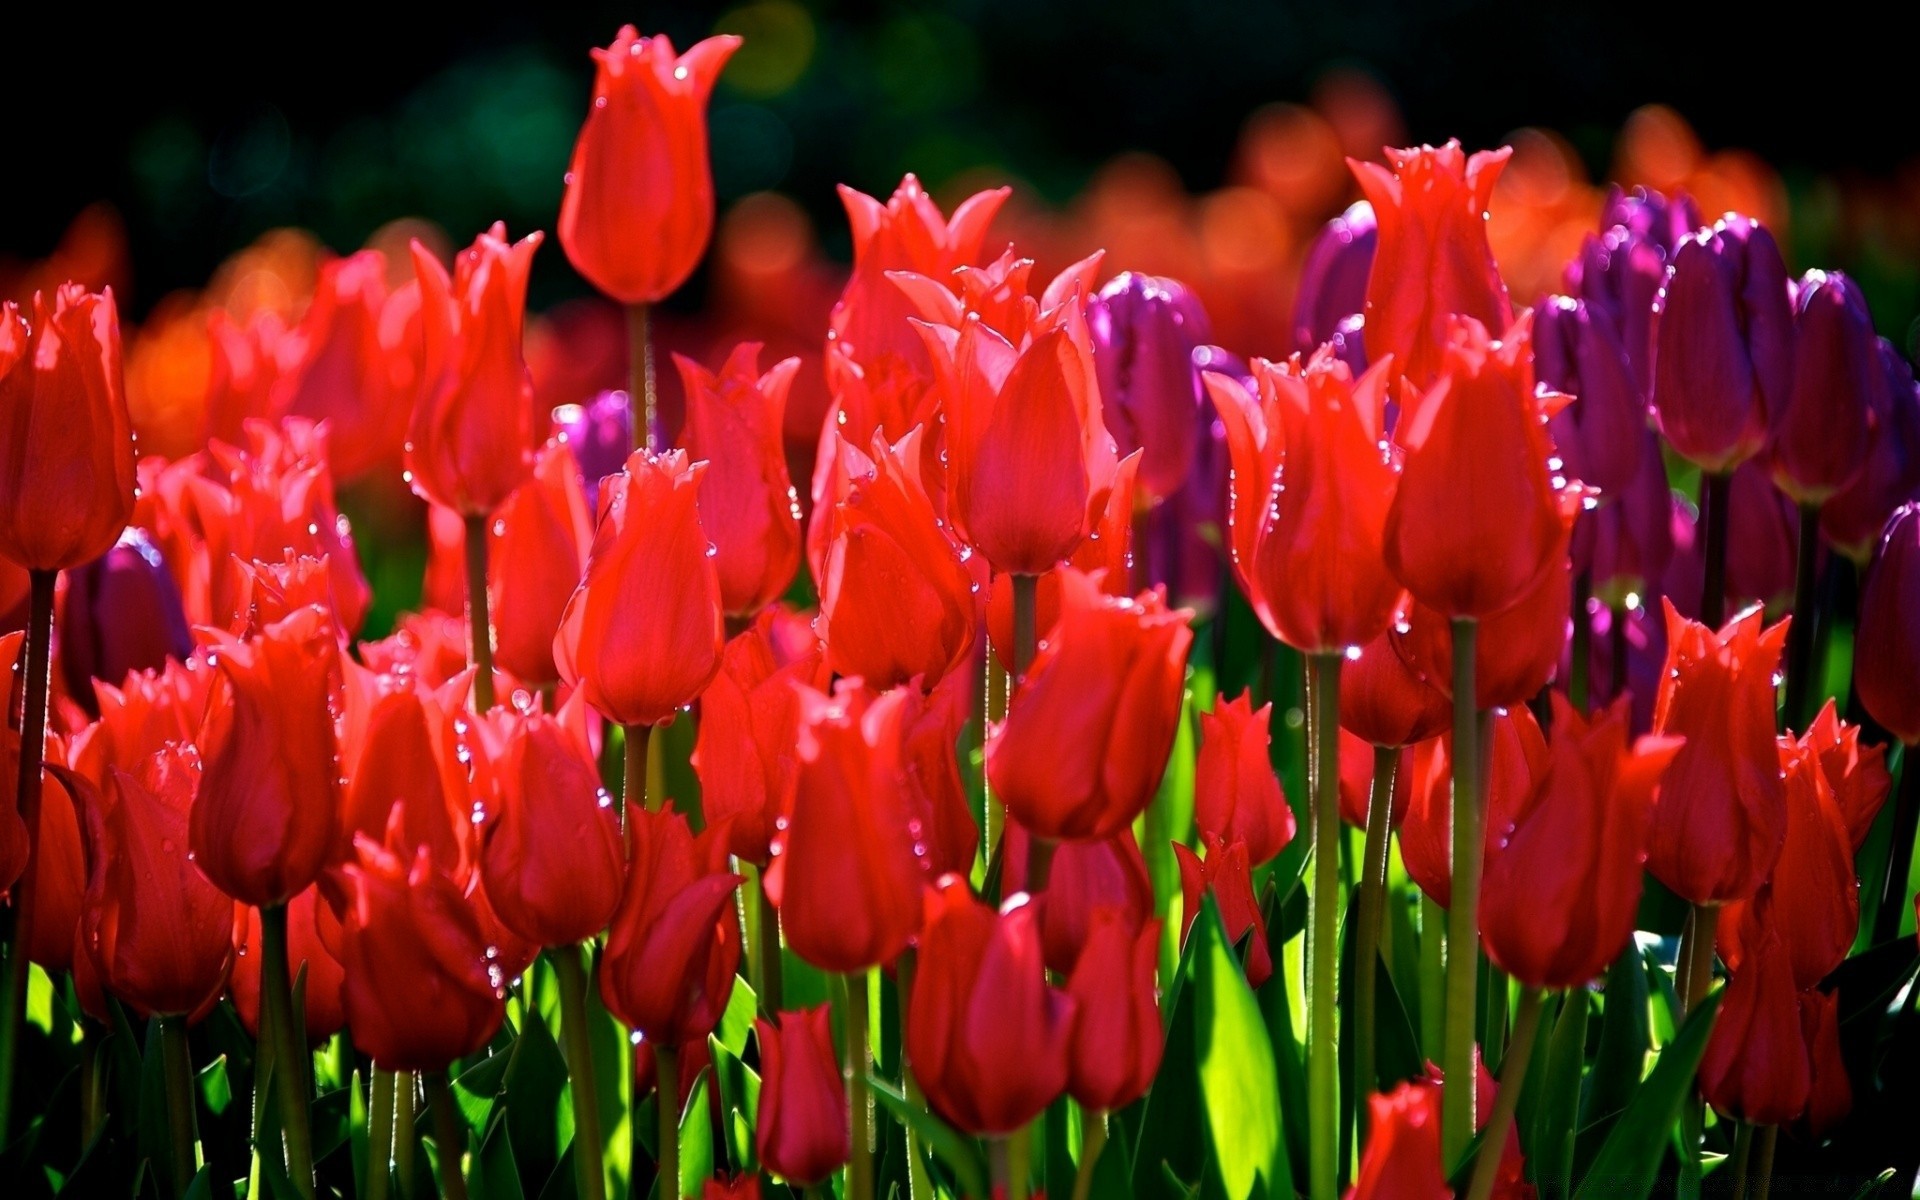 flowers tulip flower nature garden flora leaf floral petal easter growth blooming color bright bulb outdoors summer park season